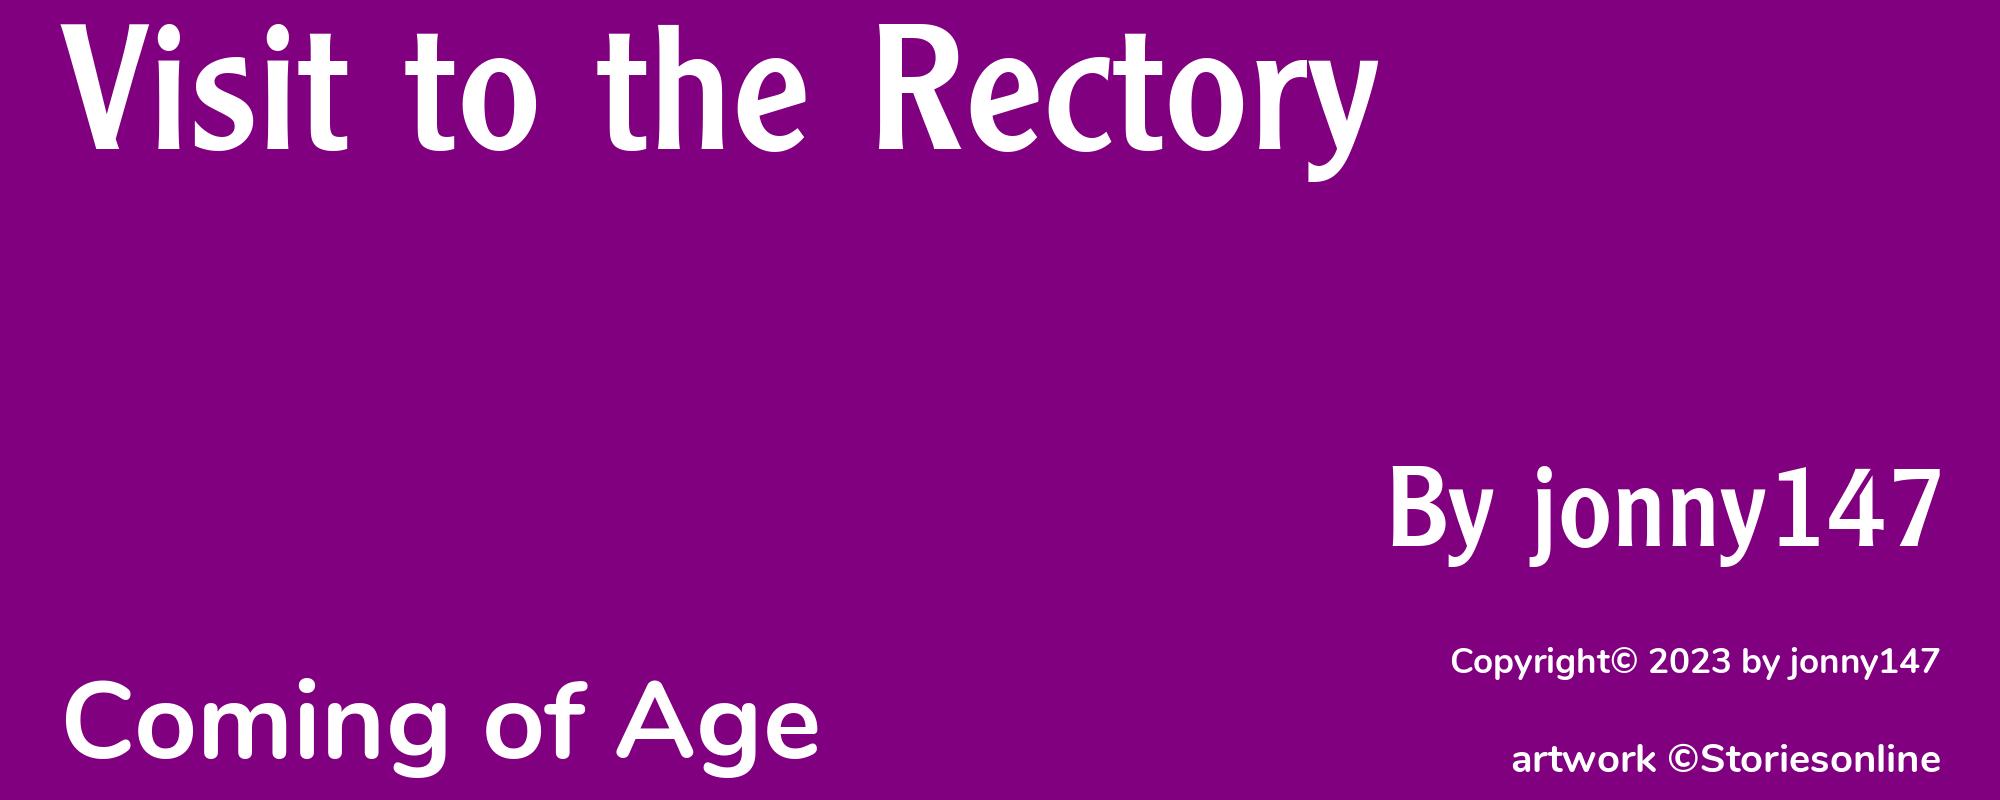 Visit to the Rectory - Cover